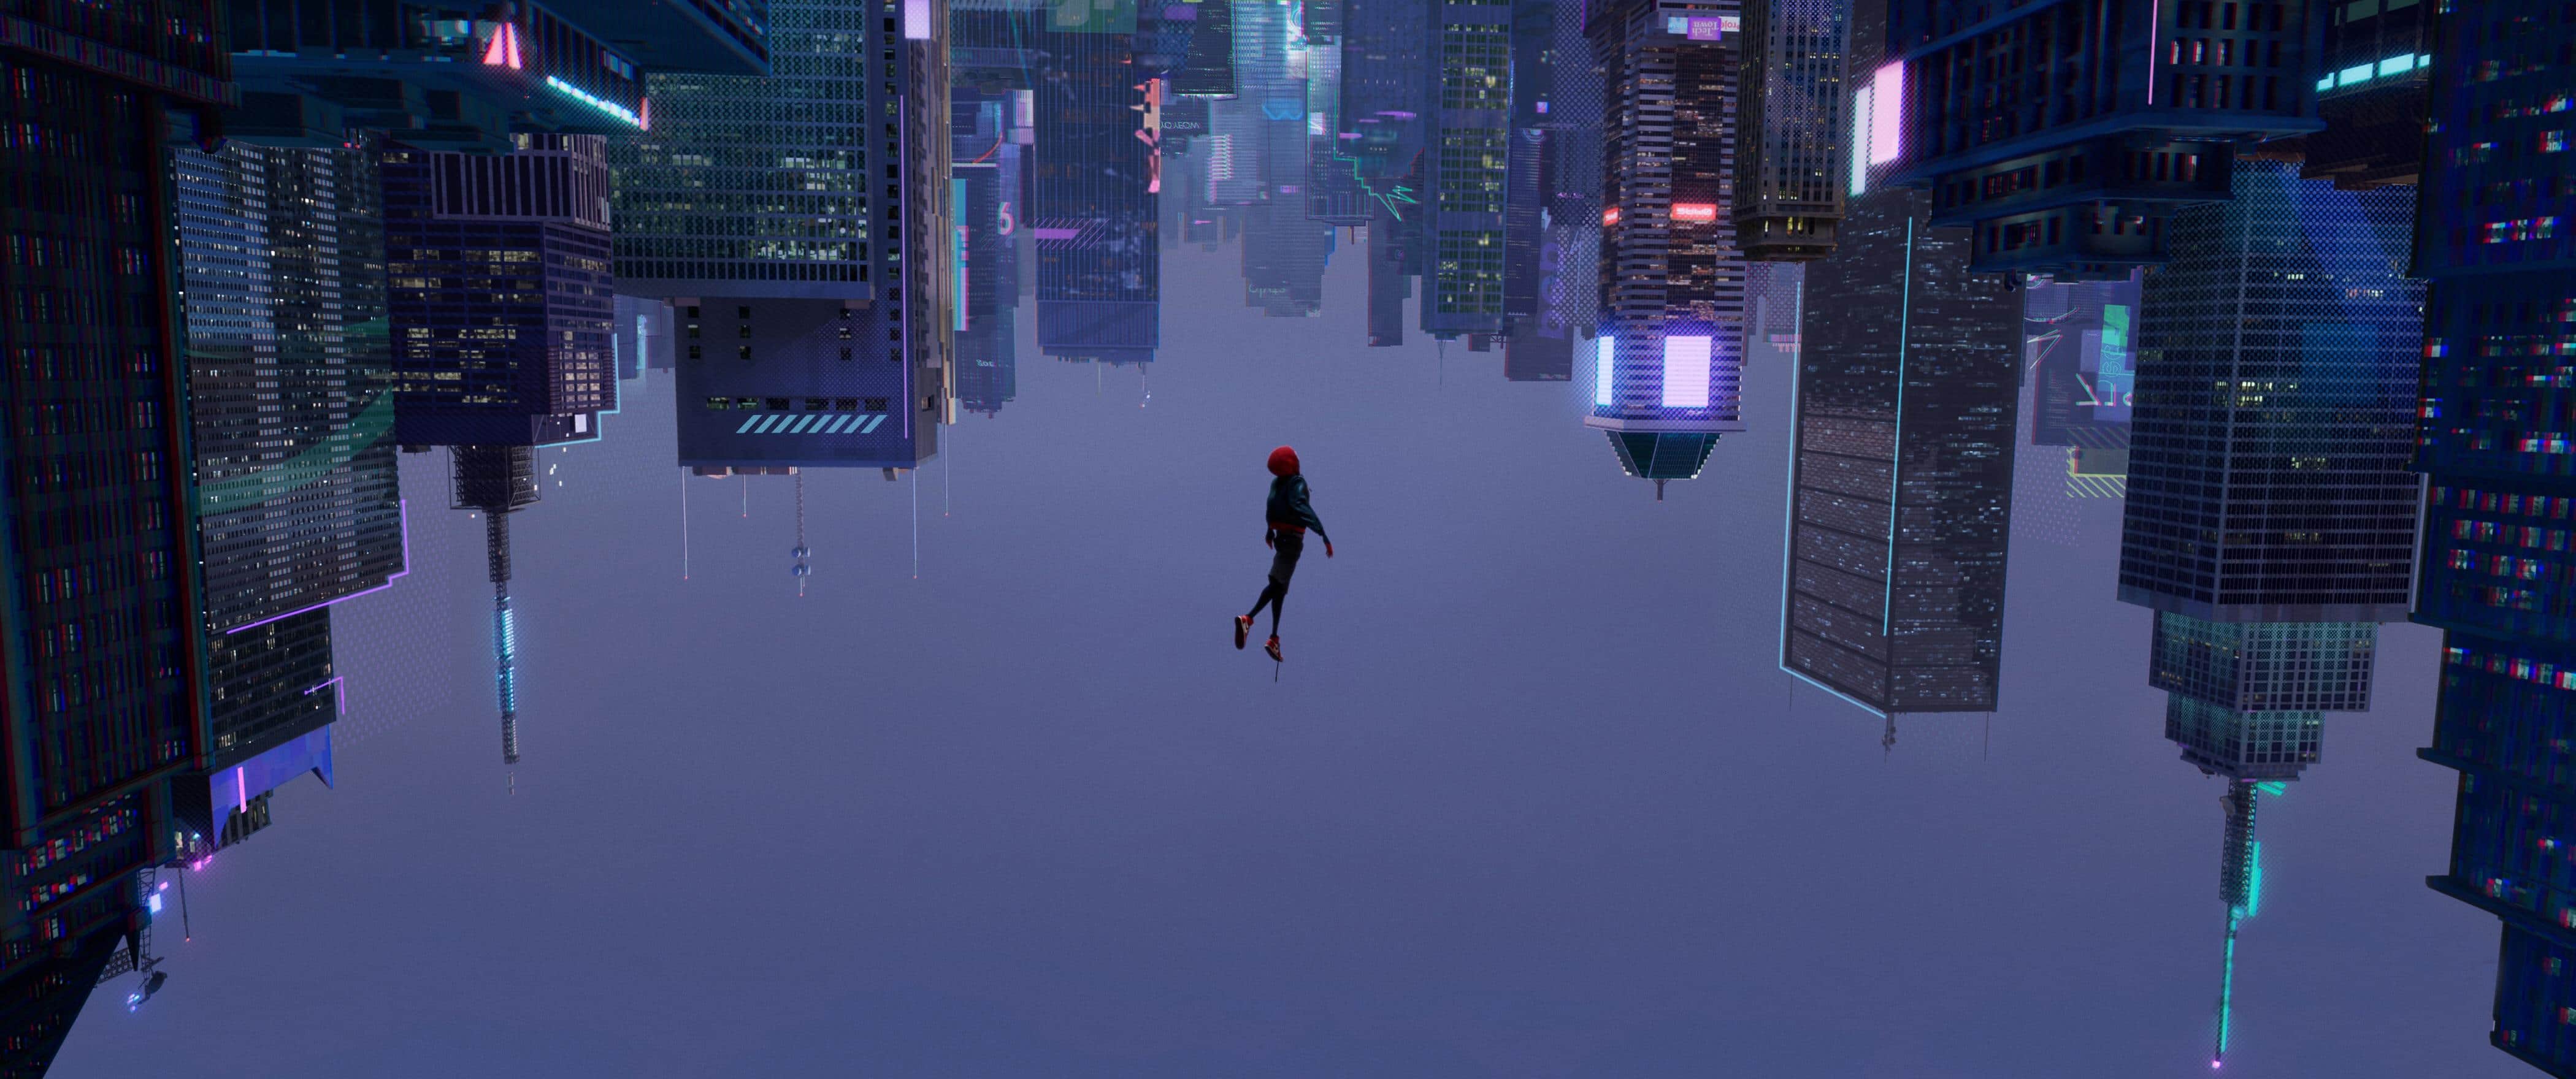 NFC on Why Spider-Man: Into the Spider-Verse is a Top 10 Comic Book Film